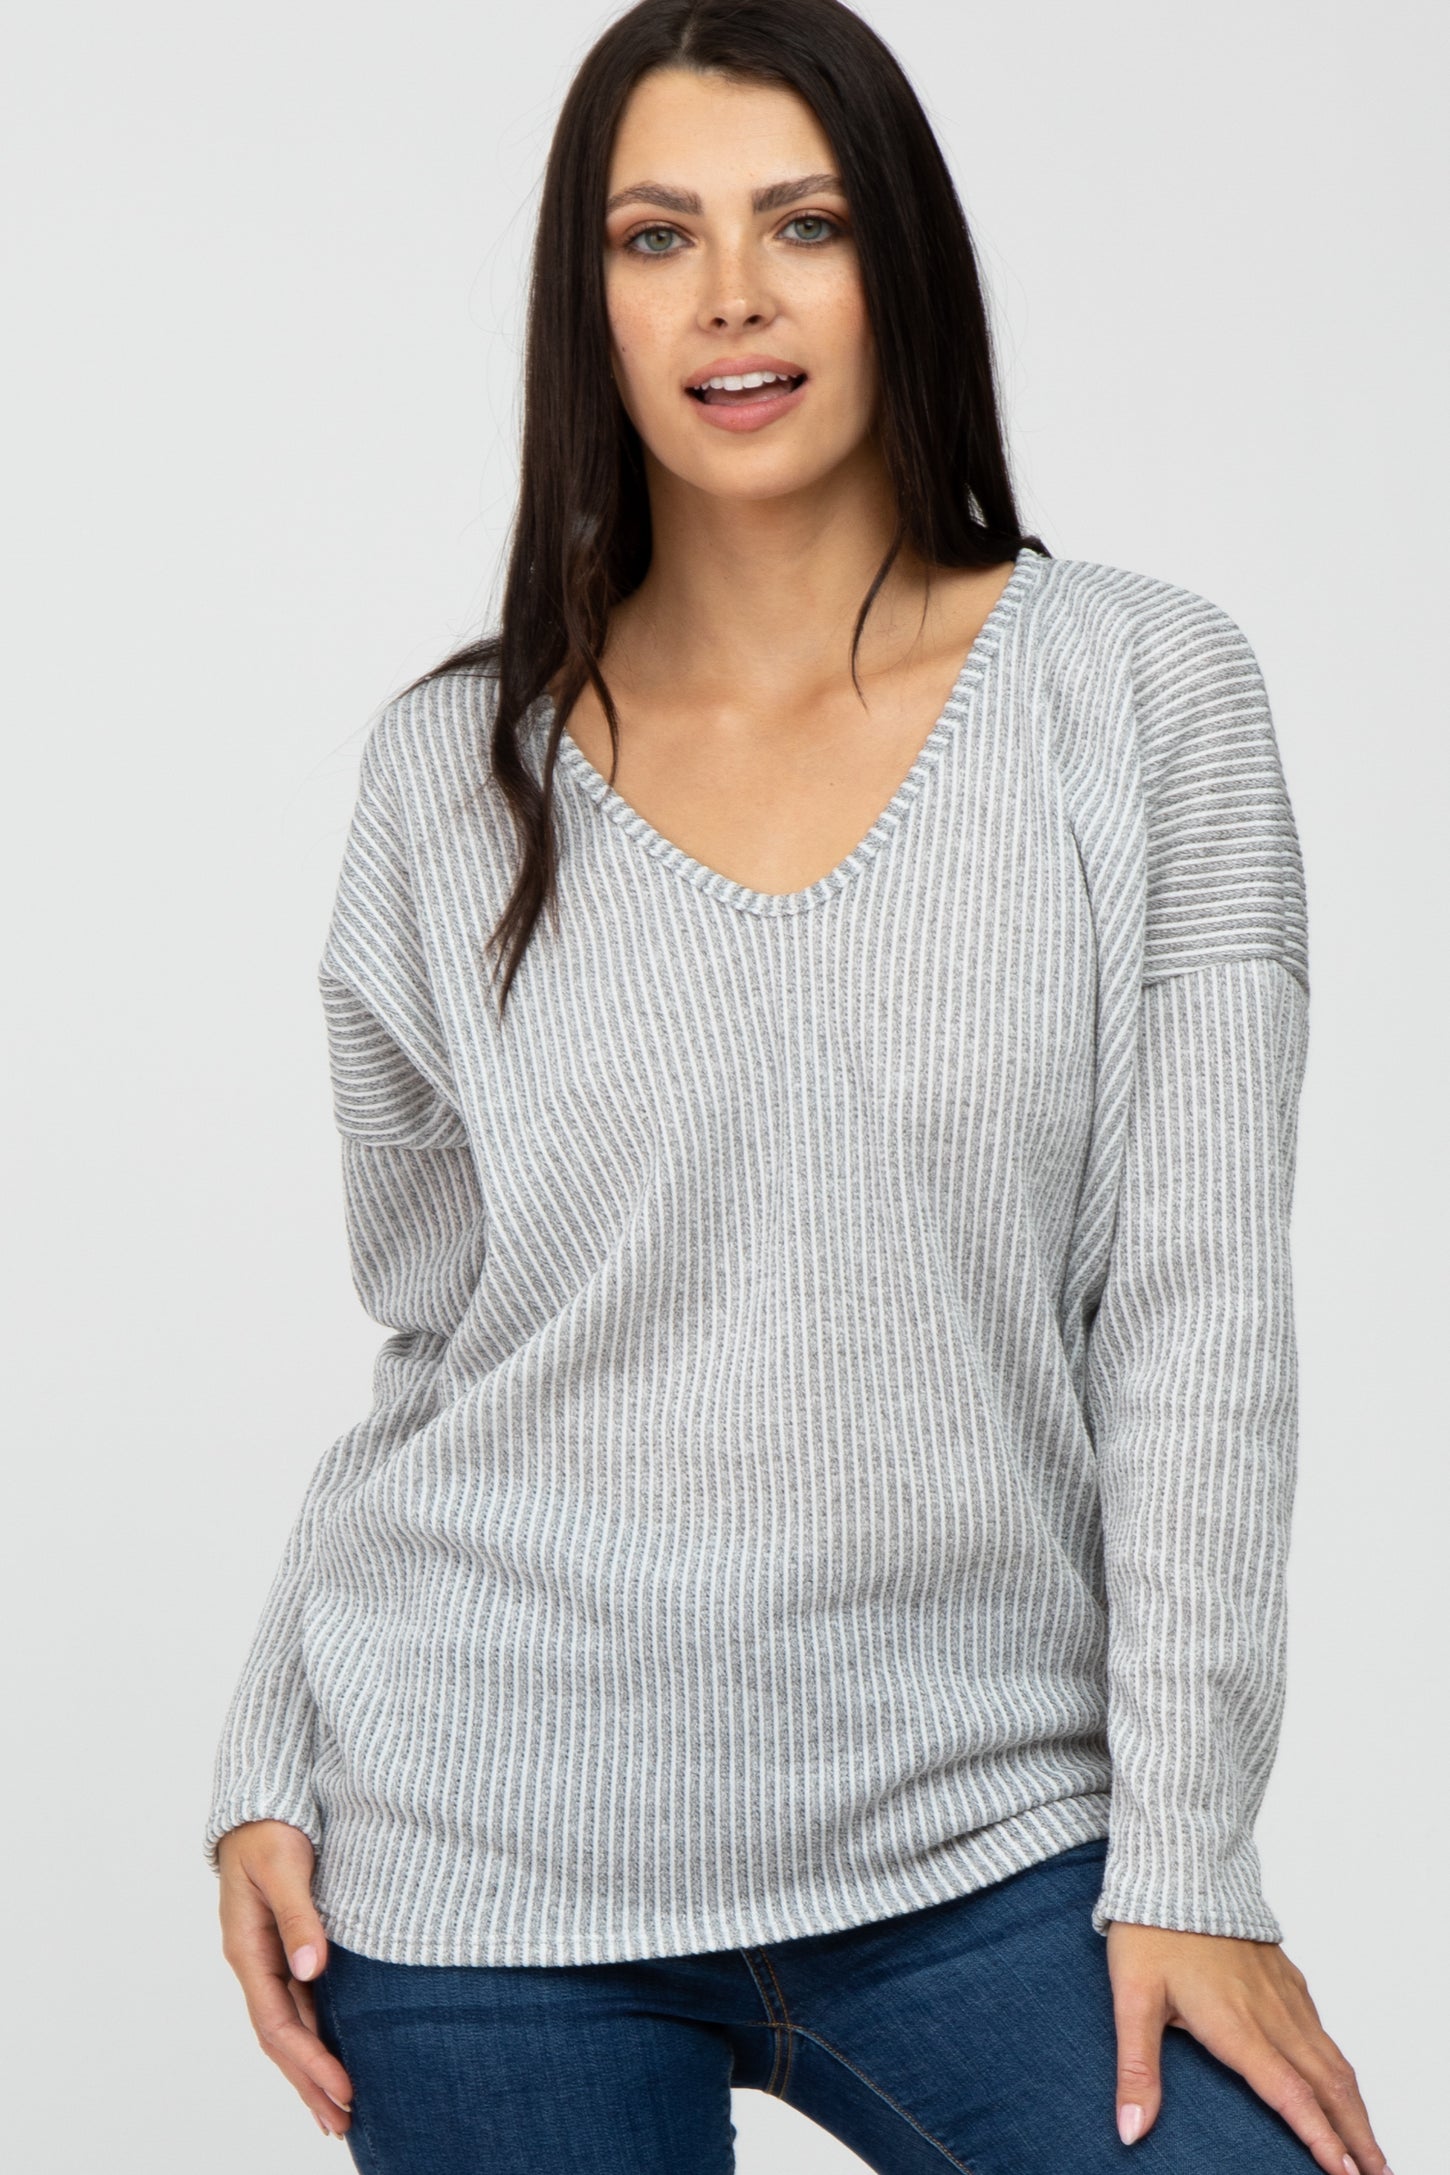 Ivory Striped Knit Long Sleeve Maternity Top